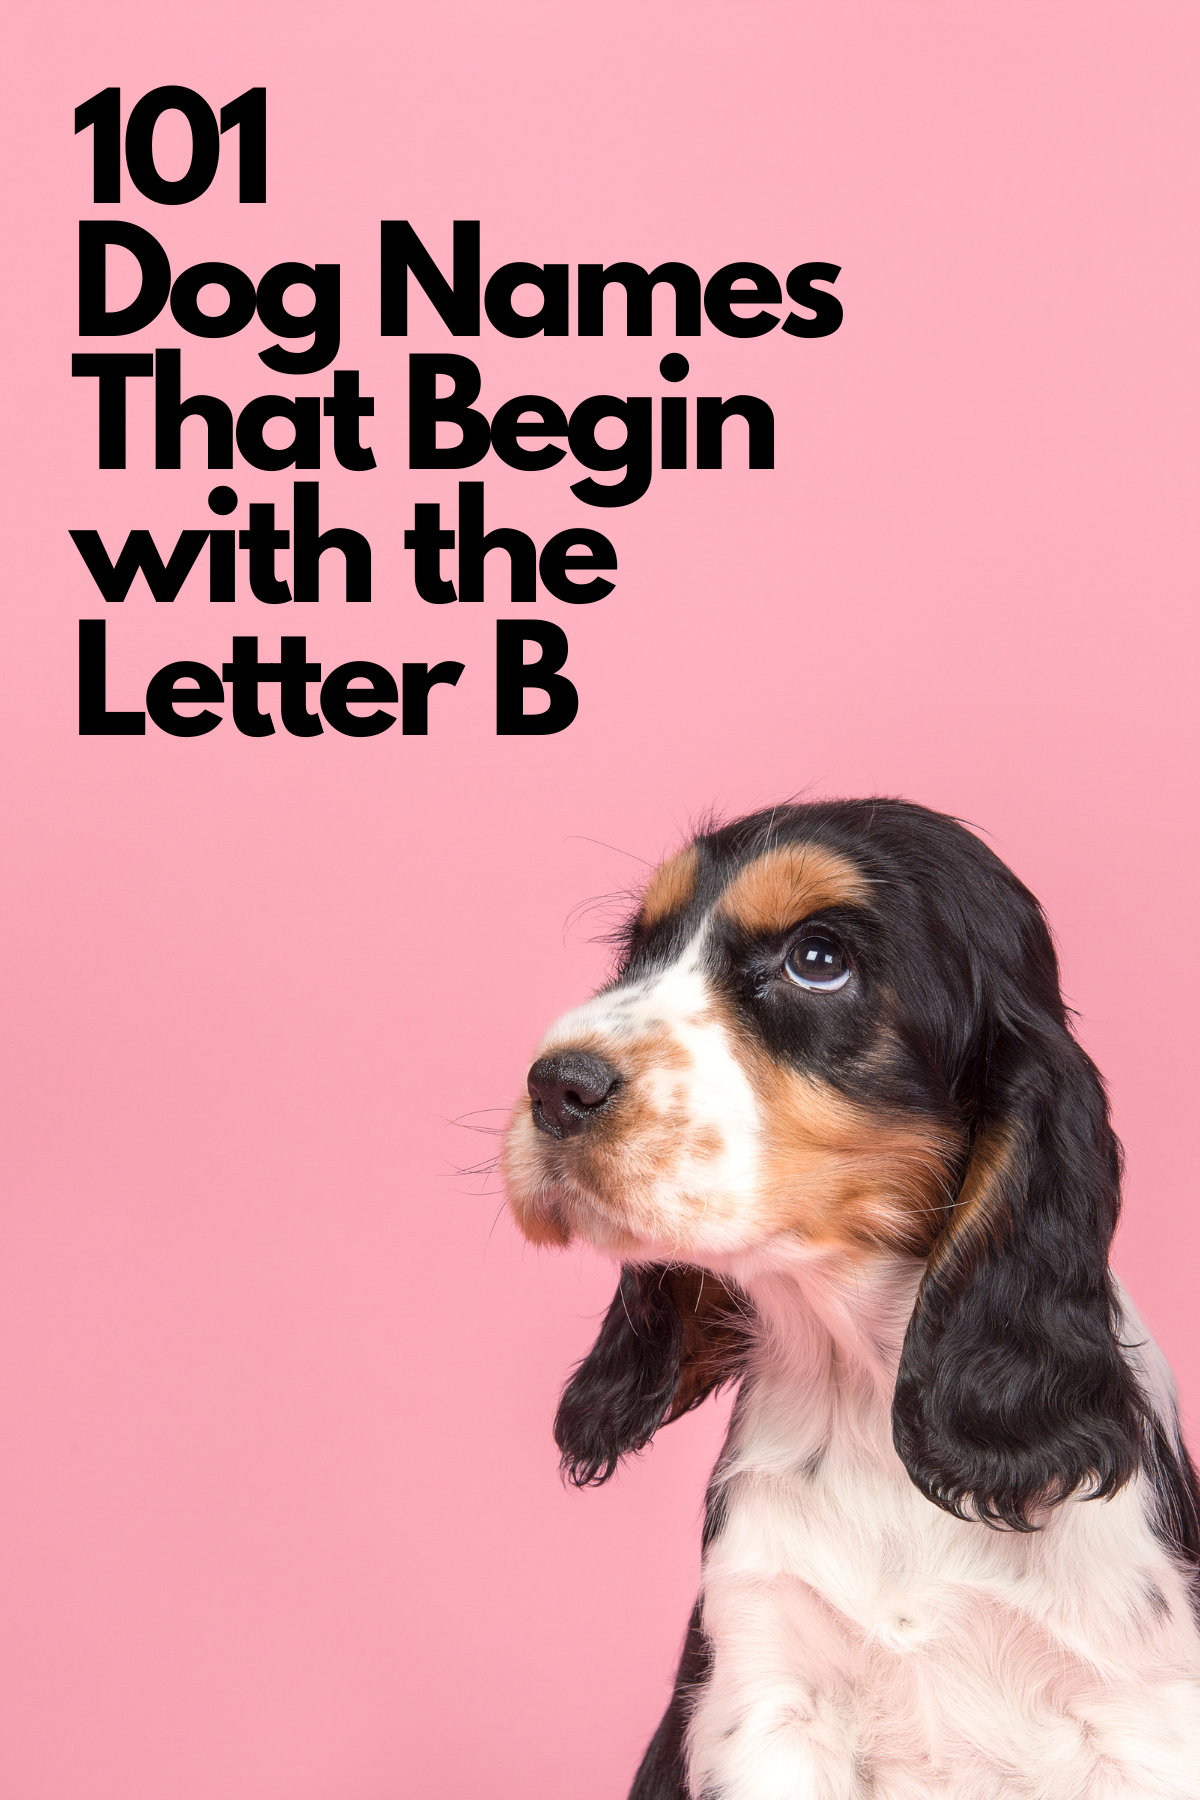 dog names that start with the letter B